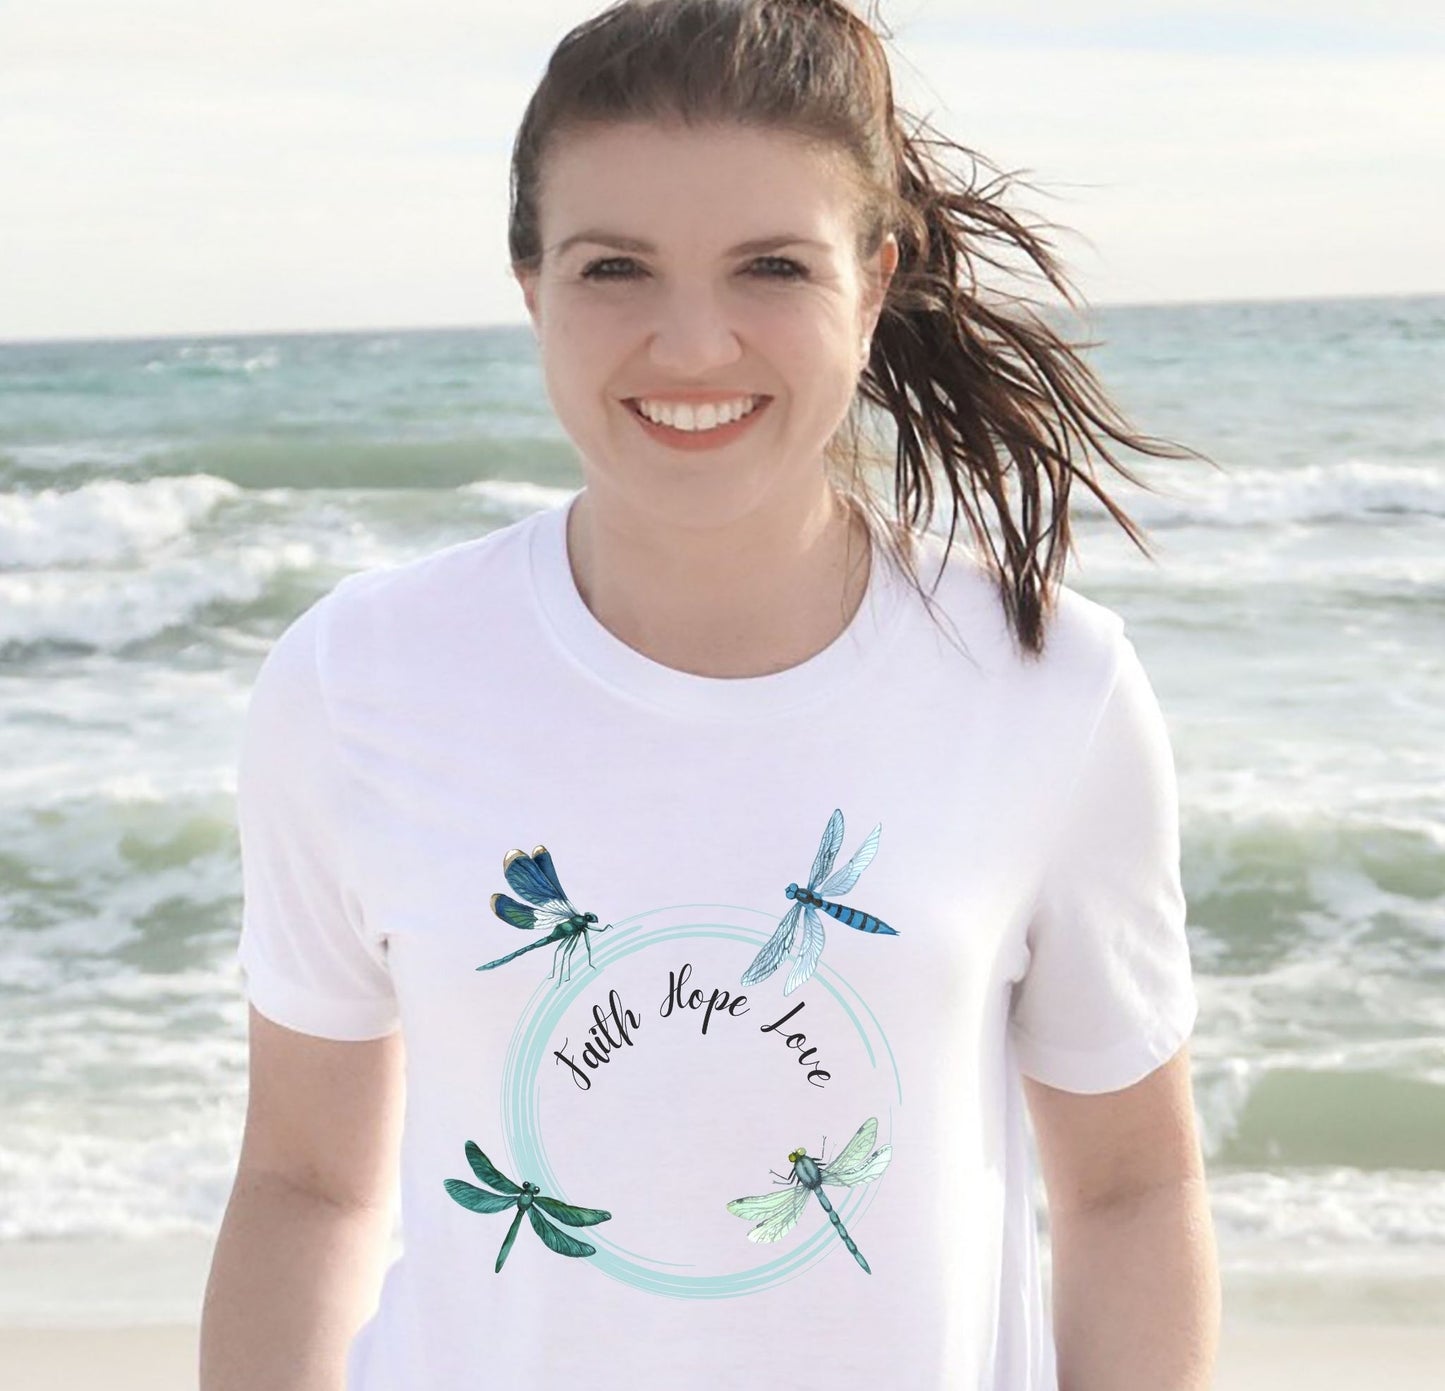 Dragonfly inspirational T shirt Faith, Hope, and Love